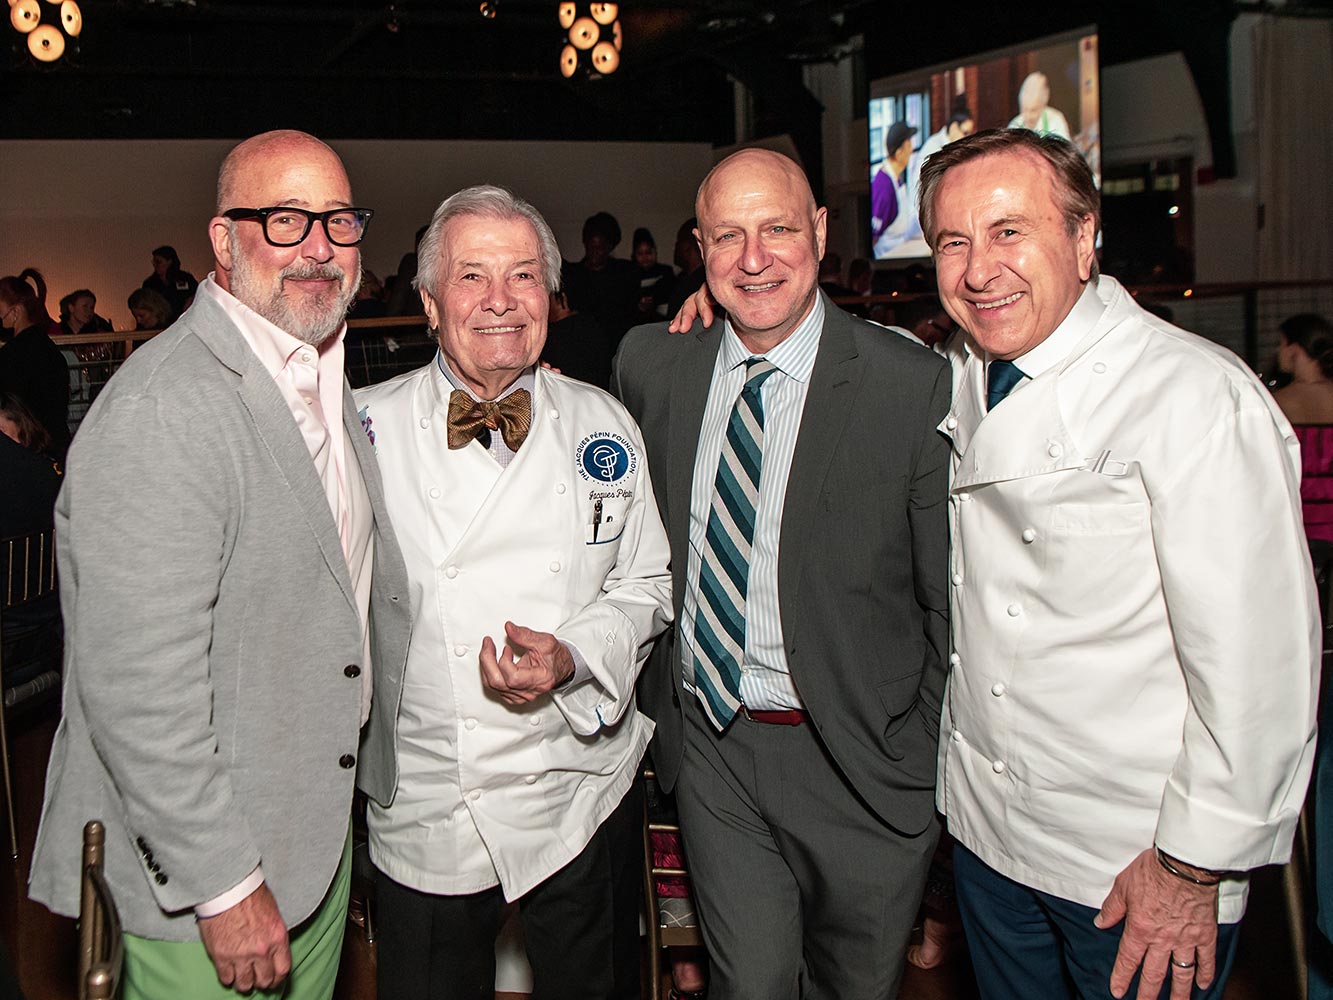 Andrew Zimmern, Jacques Pépin, Tom Colicchio and Daniel Boulud